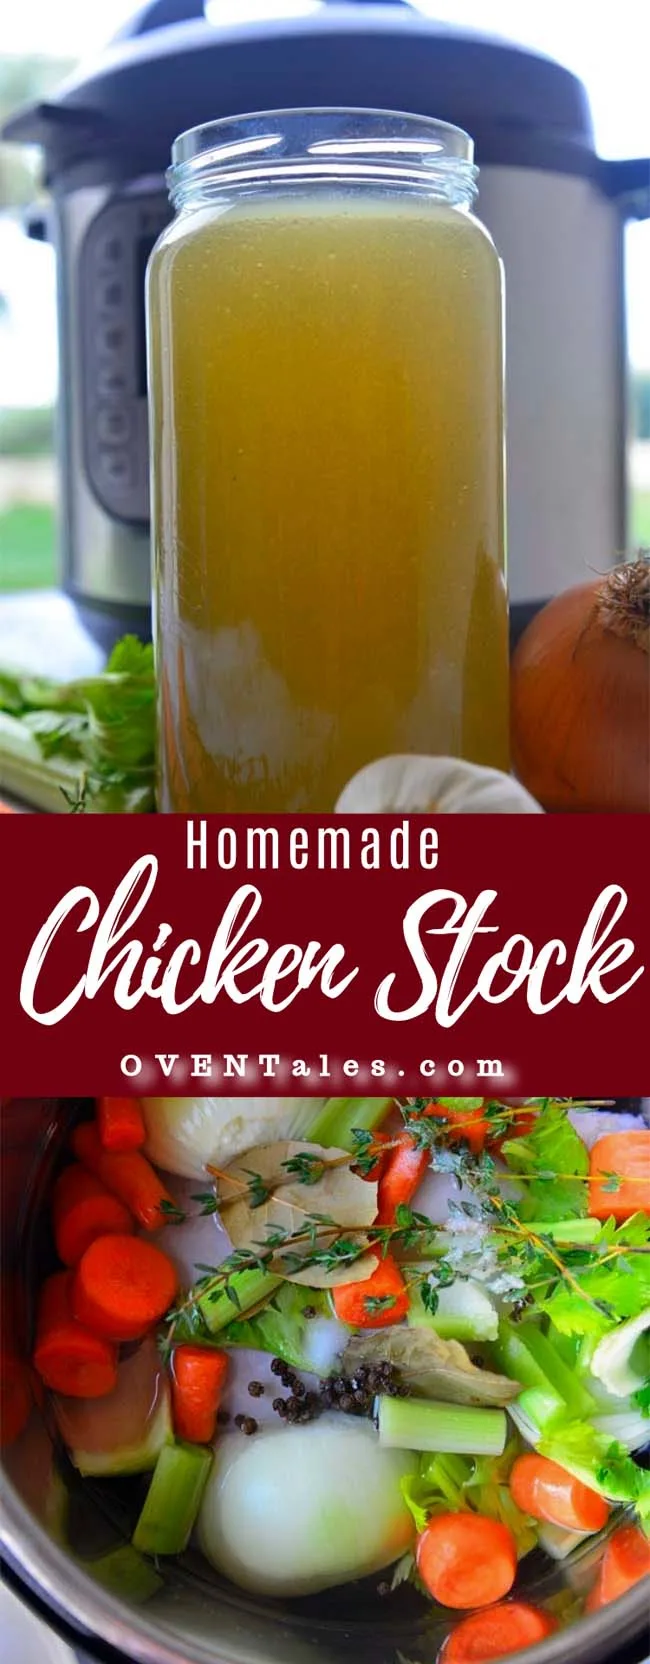 Home made chicken stock - easily made in a pressure cooker